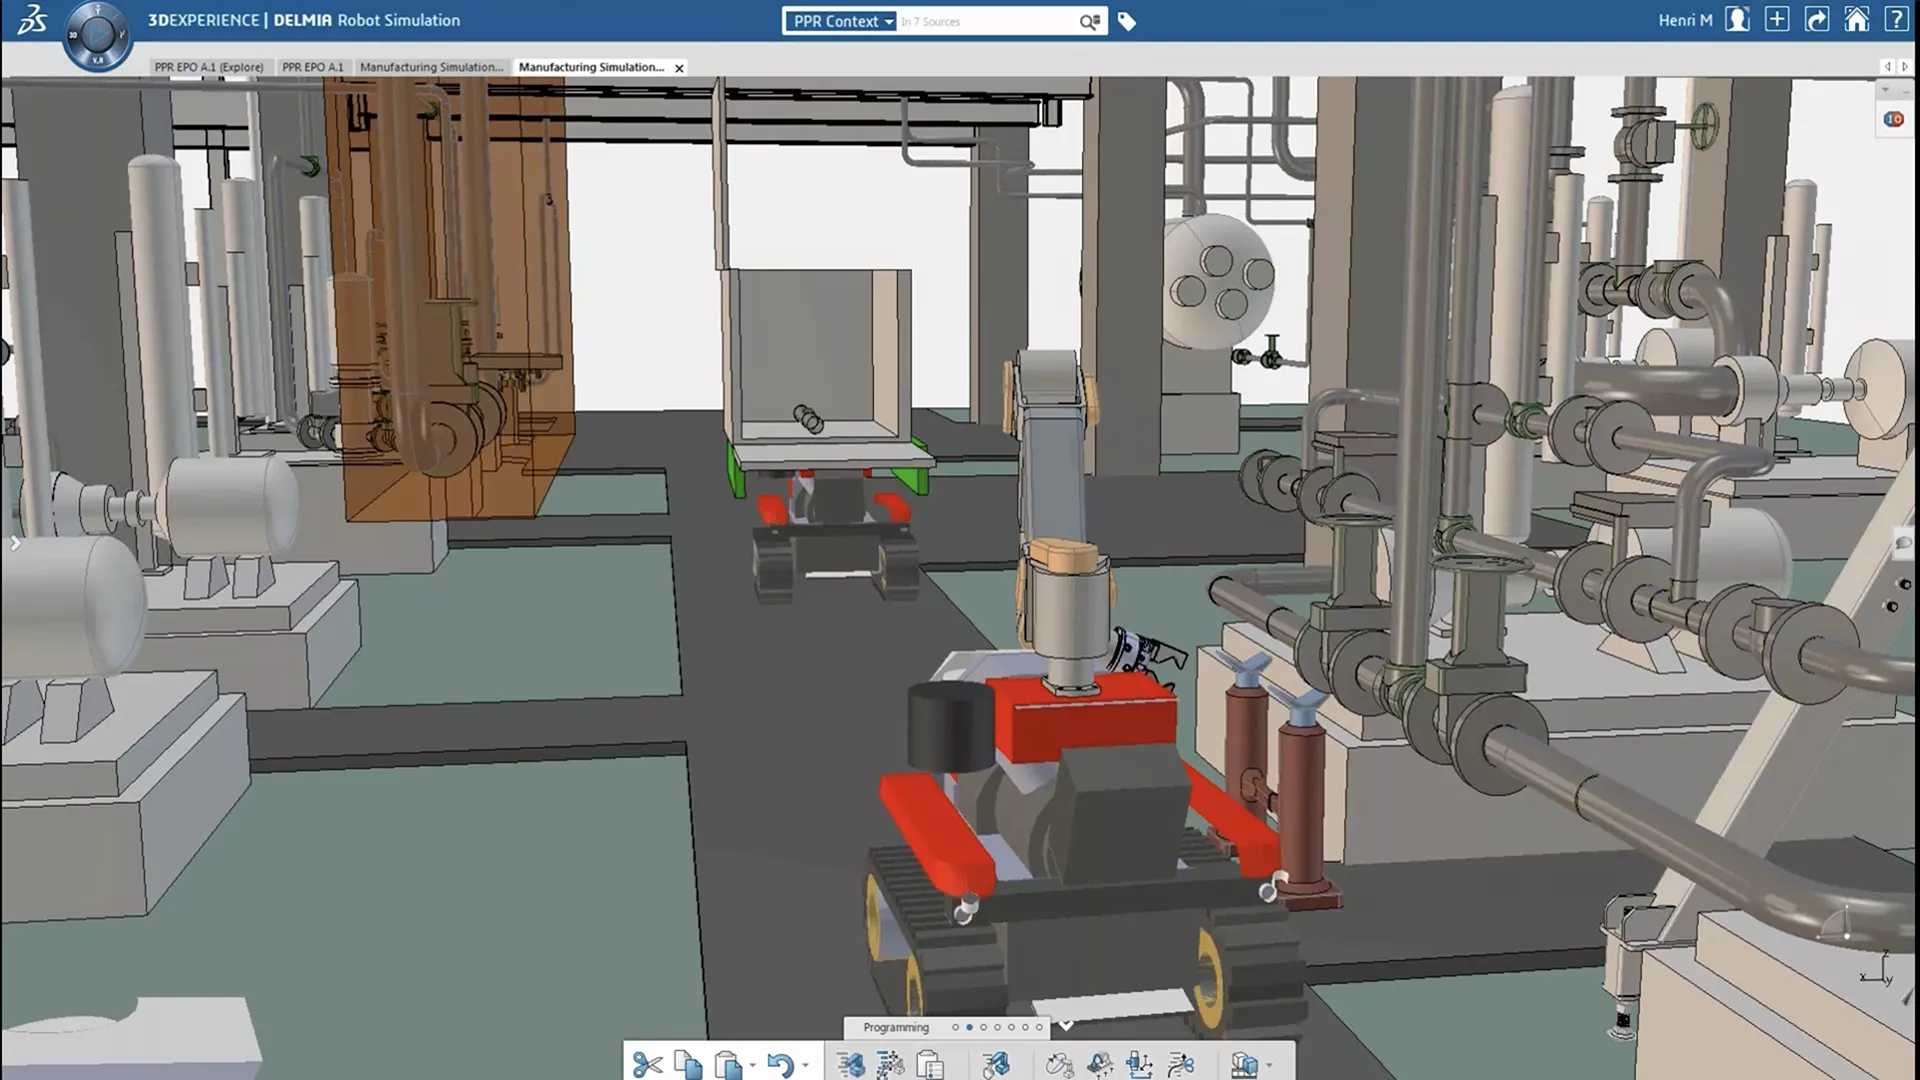 3DEXPERIENCE VIRTUAL FACTORY enables the best use of company resources.